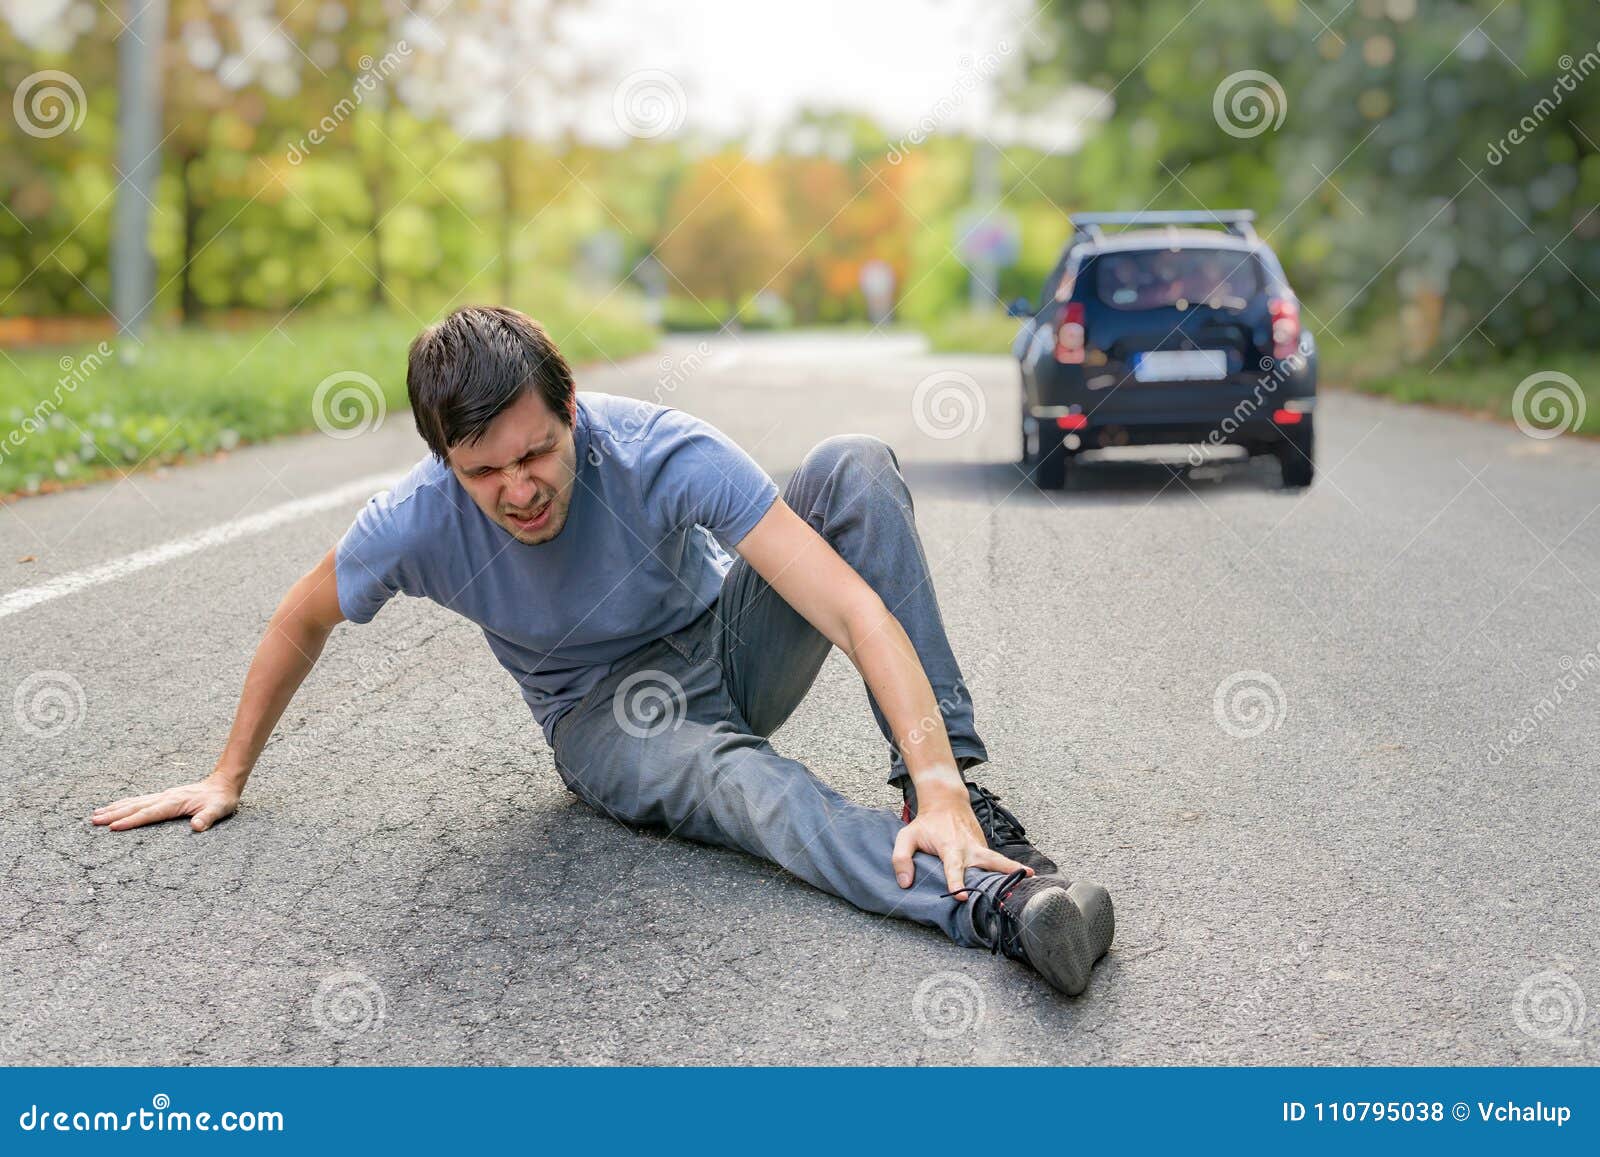 hit and run concept. injured man on road in front of a car